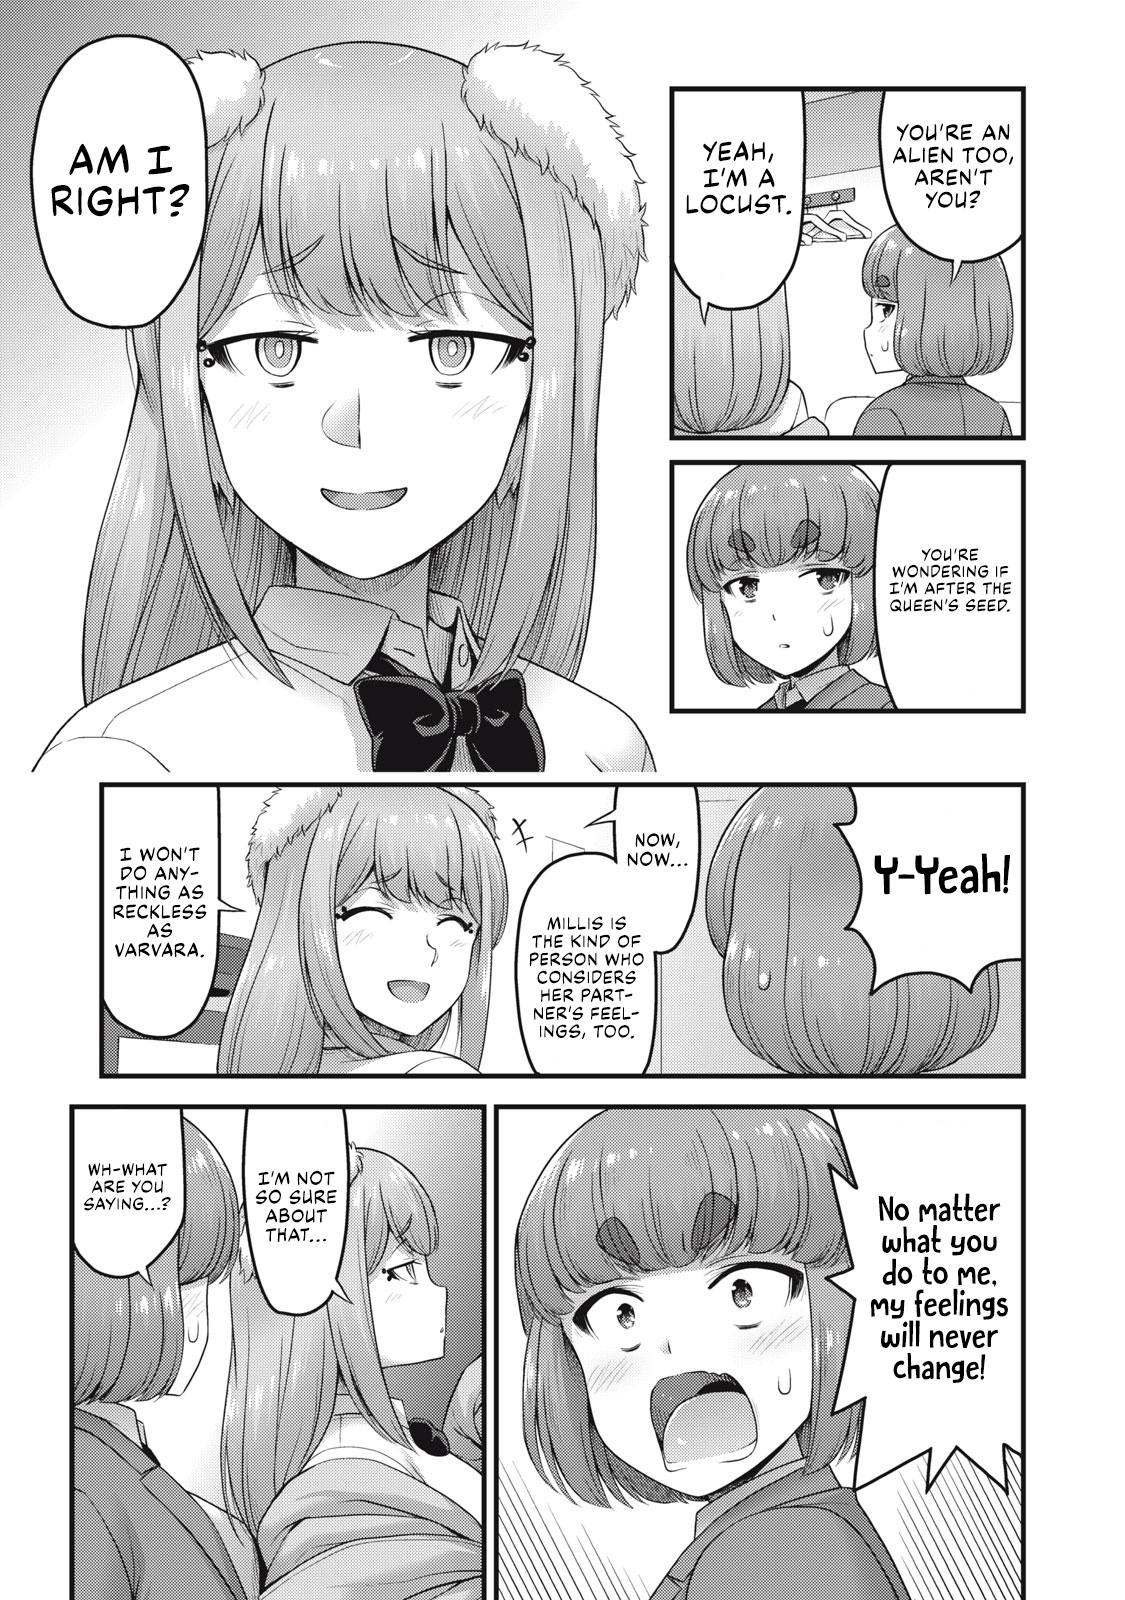 Queen's Seed - chapter 11 - #4